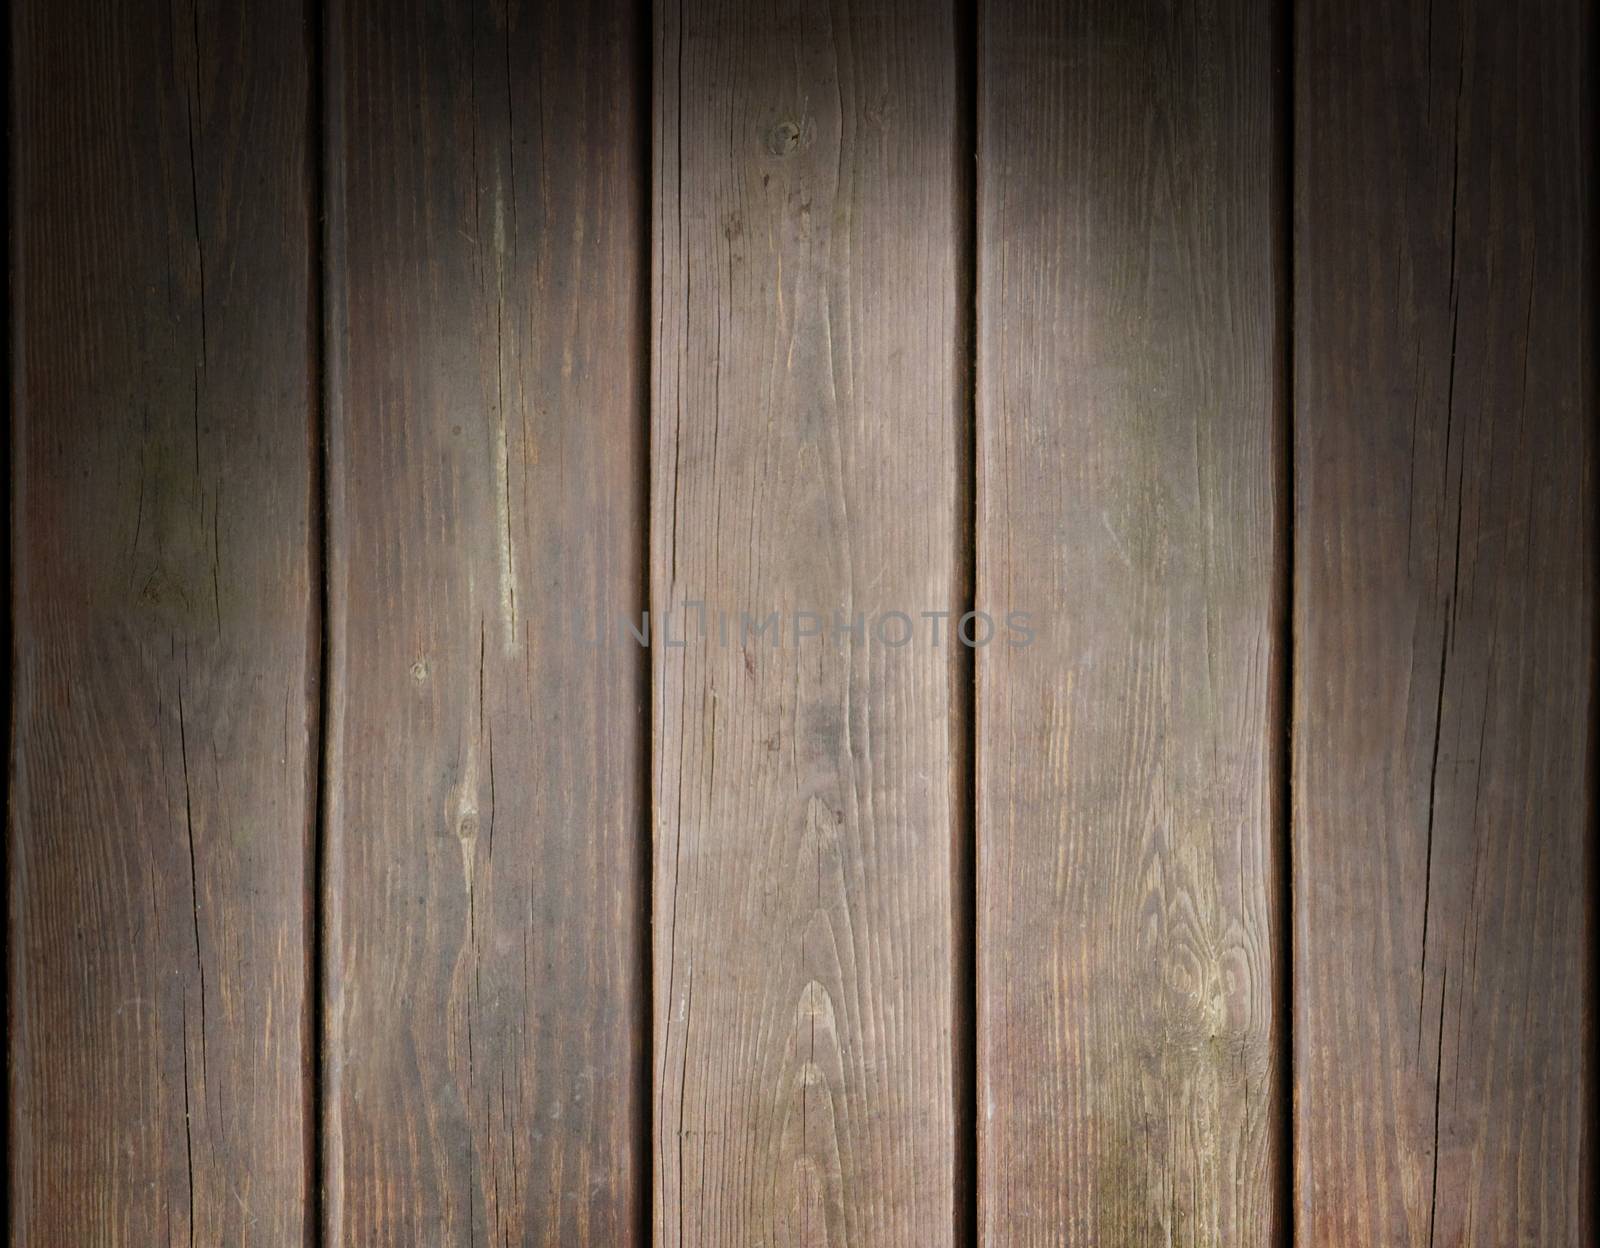 Weathered wooden plank background texture lit dramatically from above